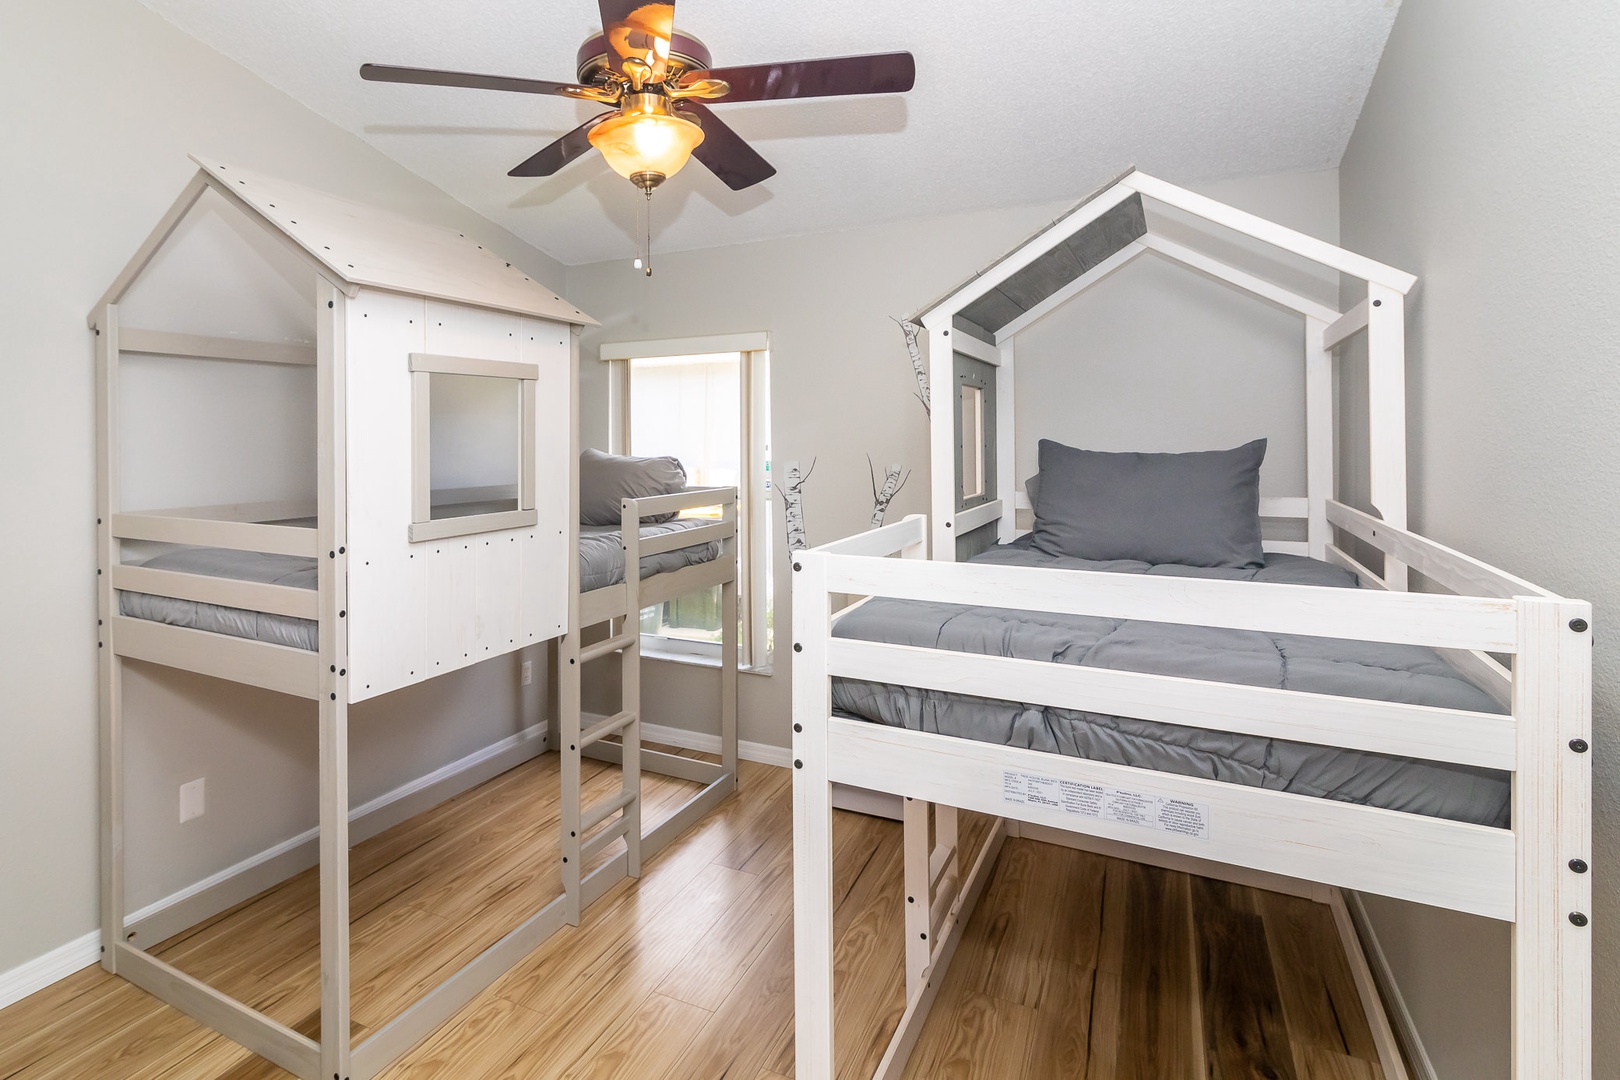 Kids FUN Bedroom #1 with 2 Twin beds. Additional mattresses can be added to the bottom bunk spaces